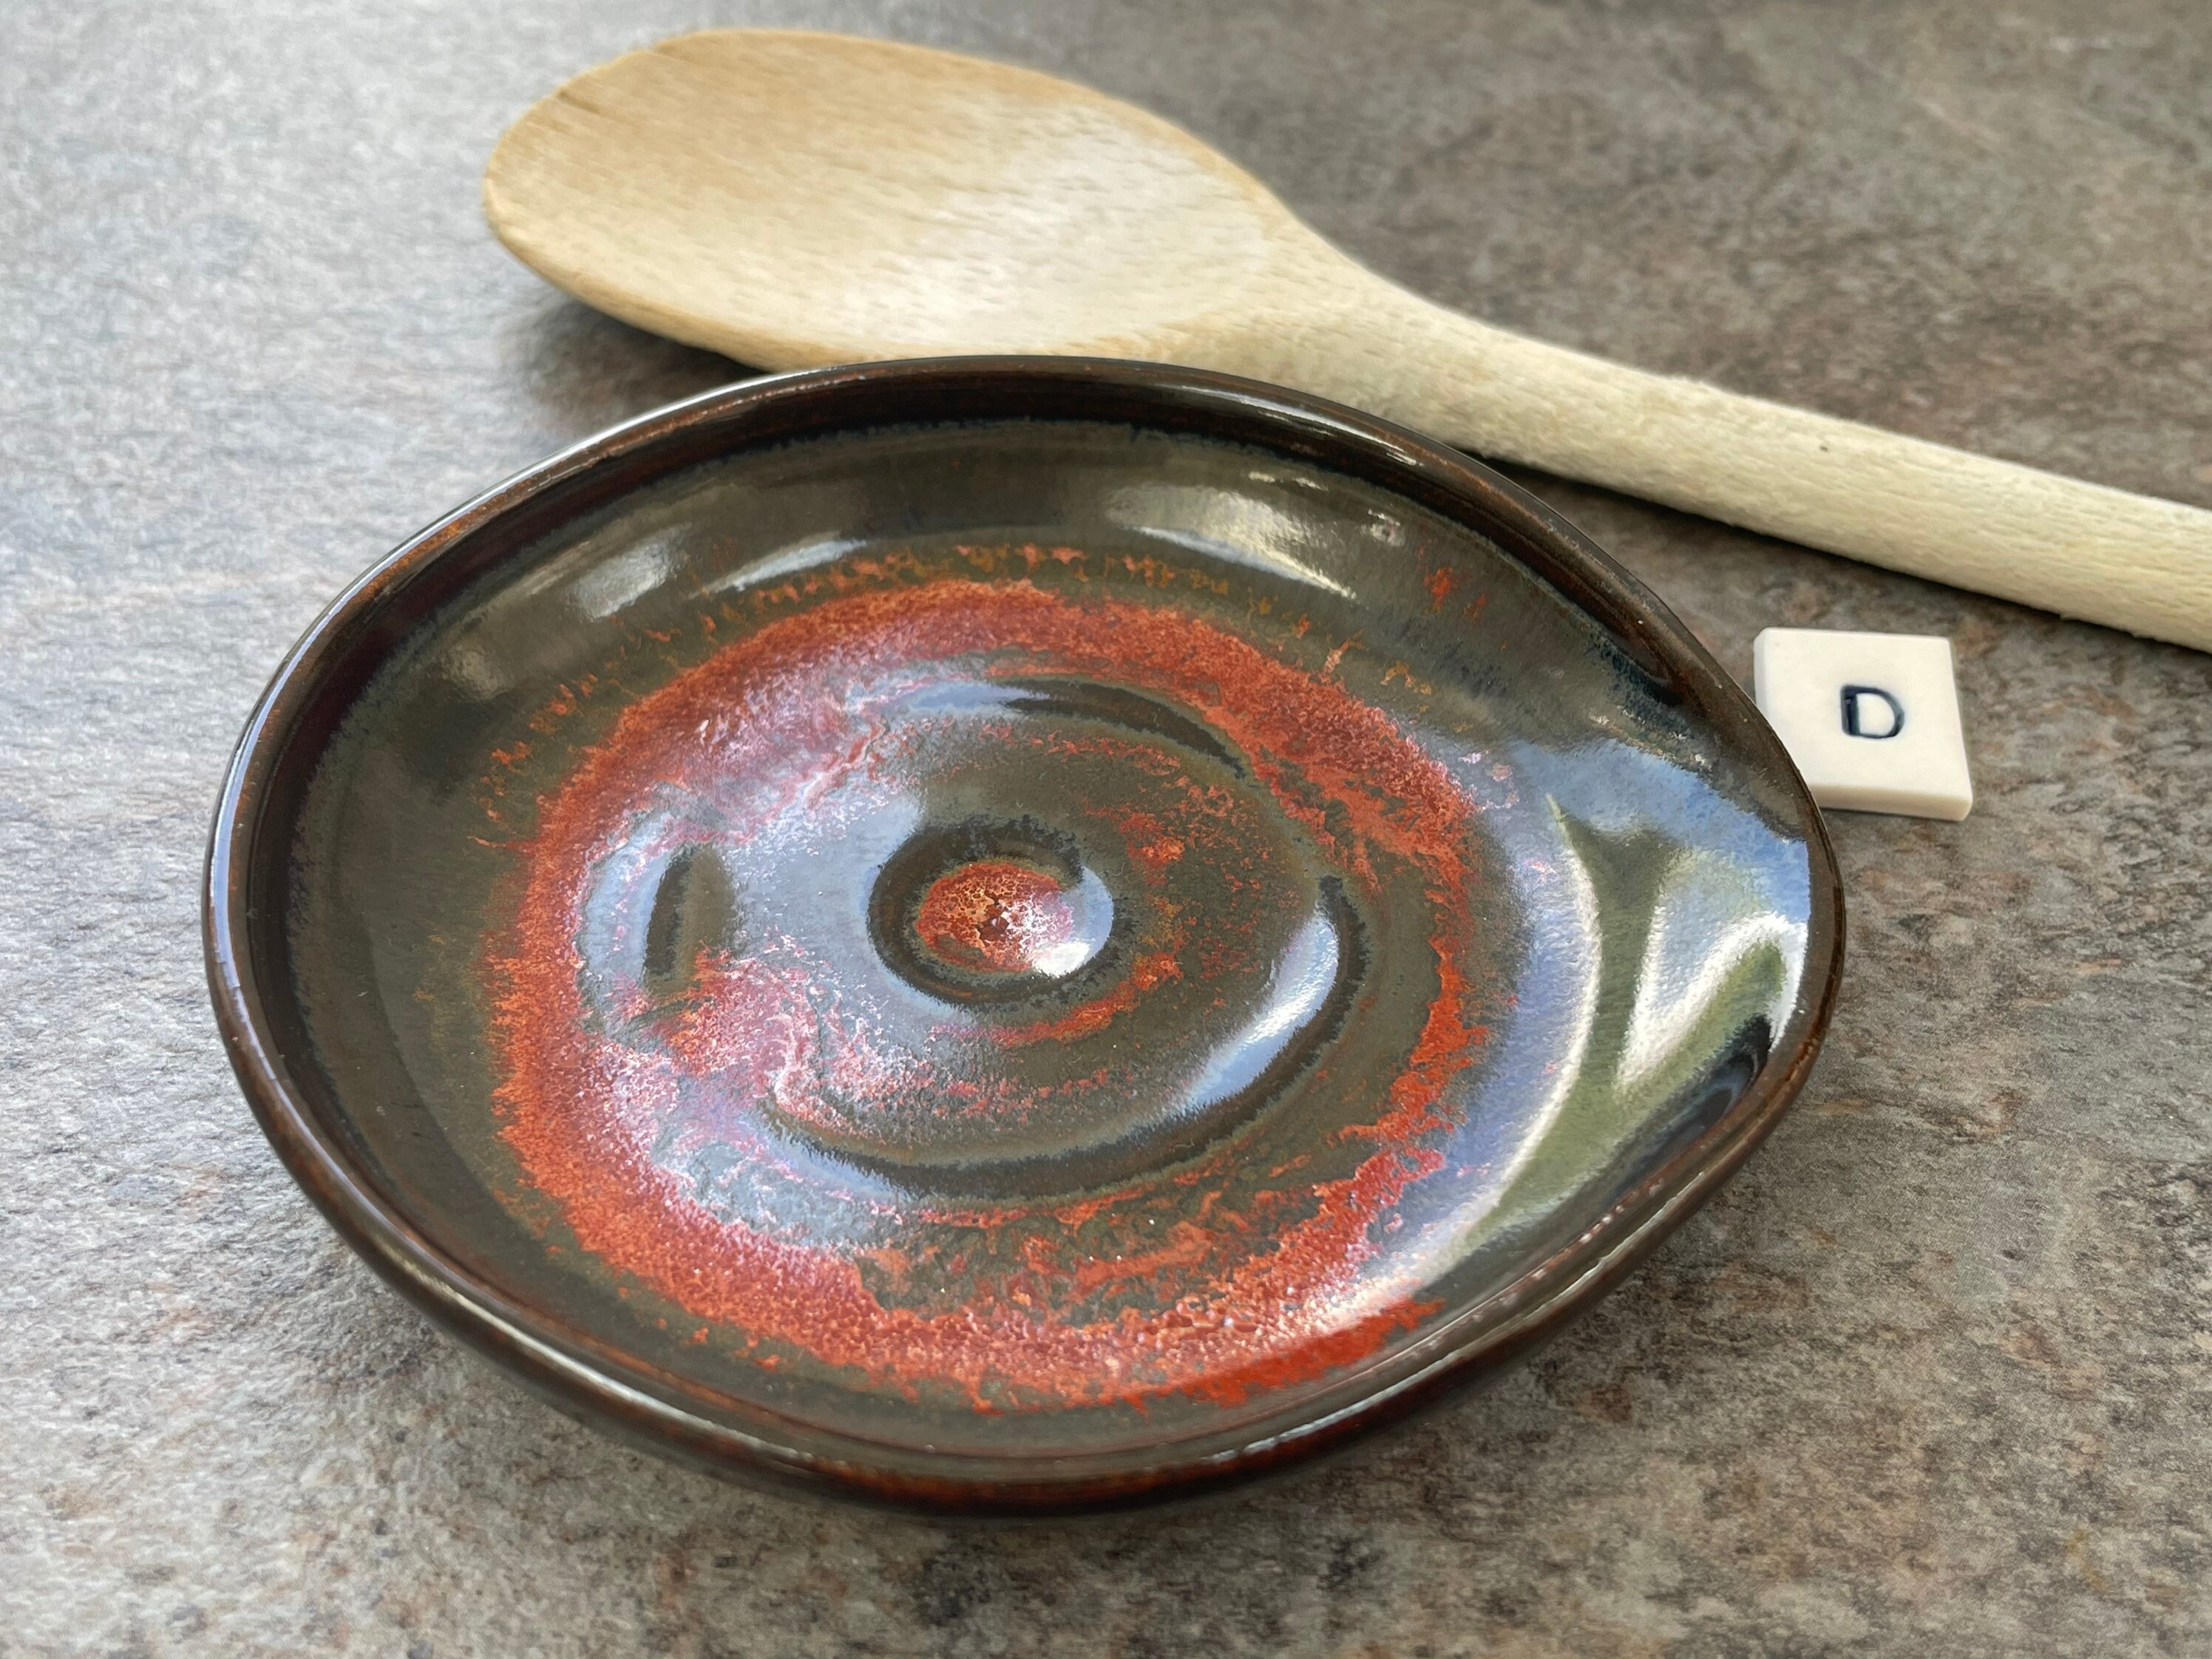 Totalee Gifts Fun Ceramic Spoon Rest - Great Foodie Gift Basket Item! You Will Eat It and Like It